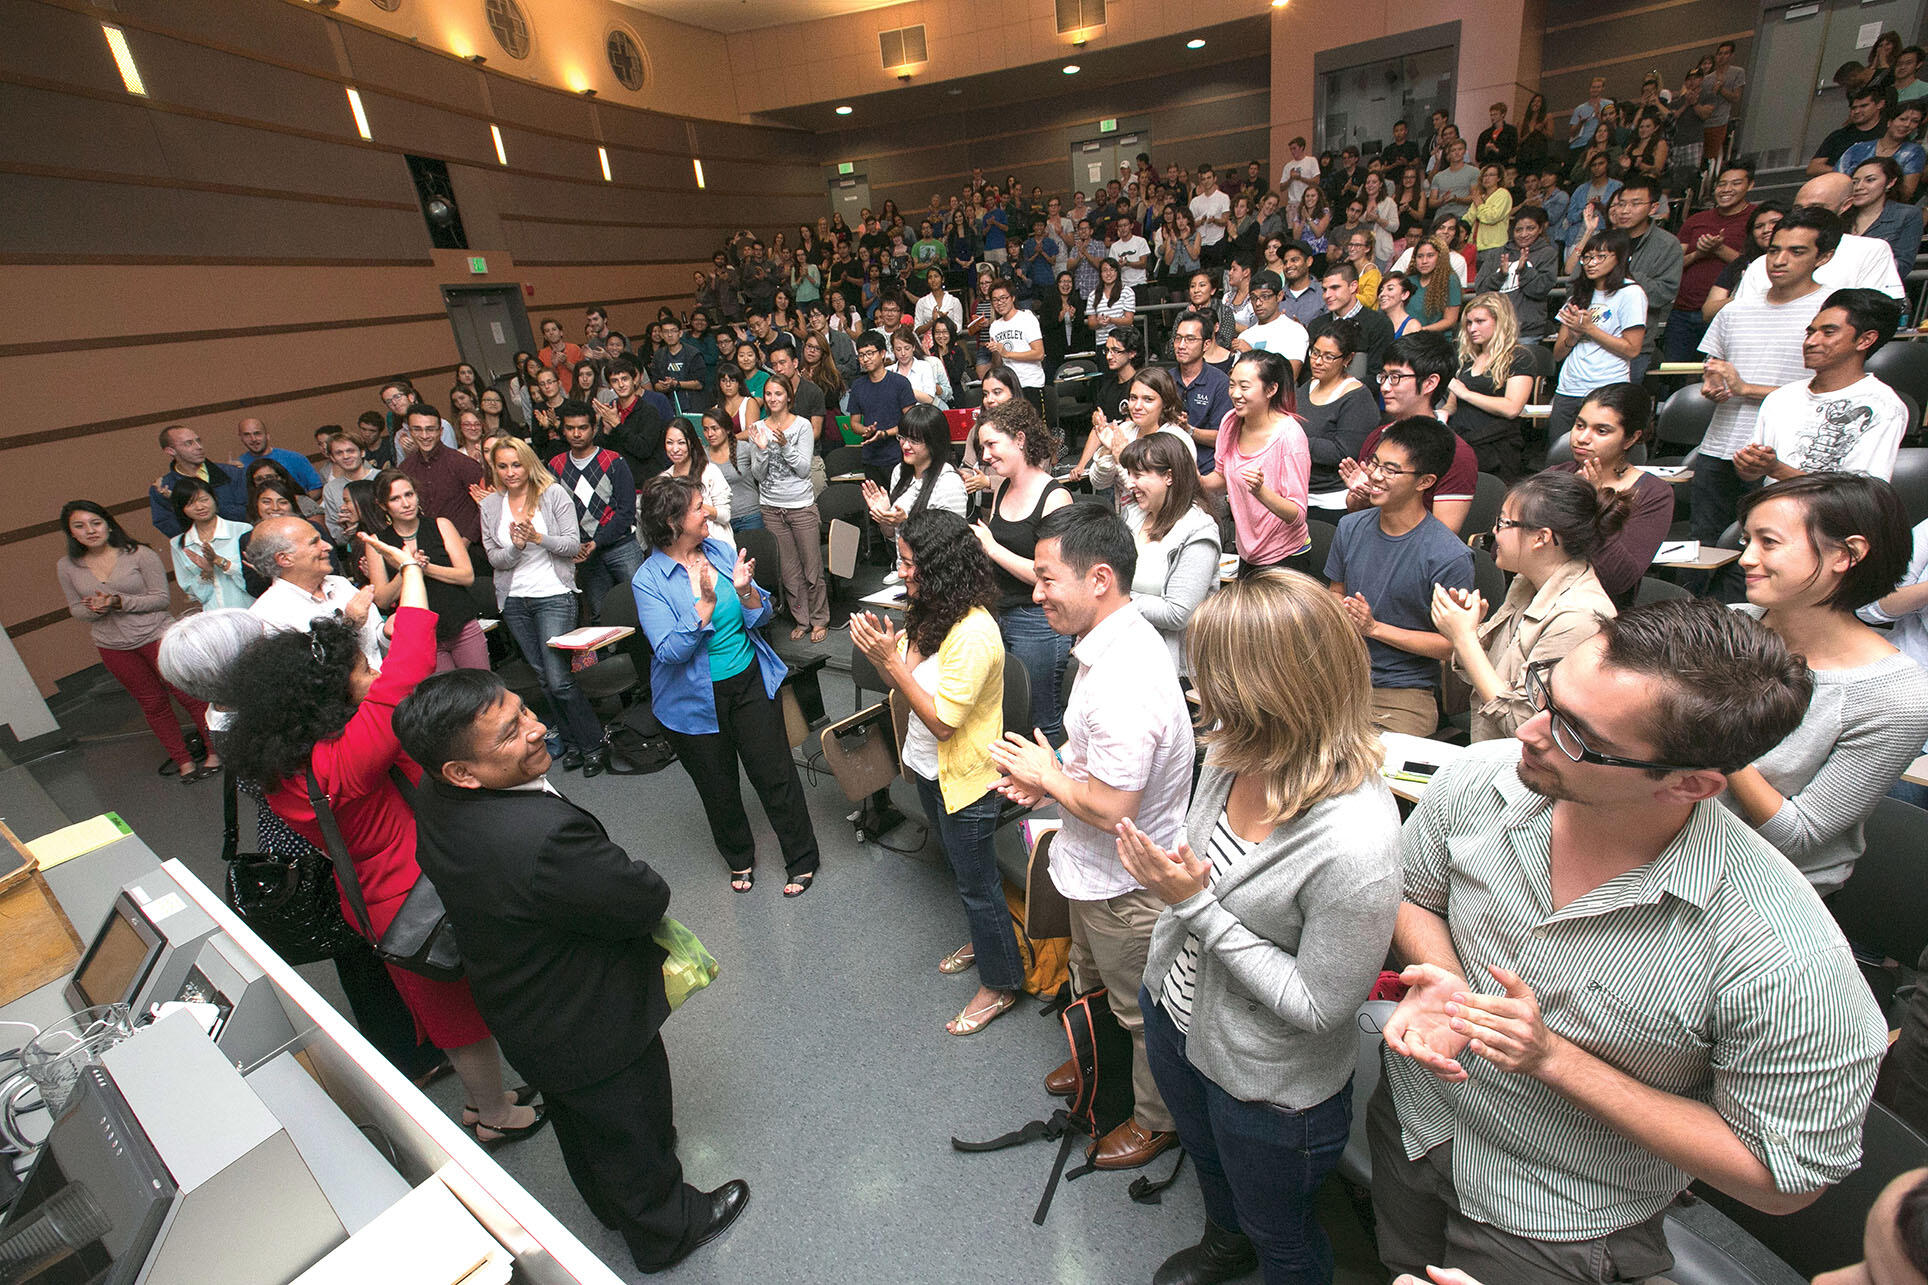 UC Berkeley students in “The Southern Border” course offer a standing ovation to the judges during their campus visit. (Photo by Jim Block.)